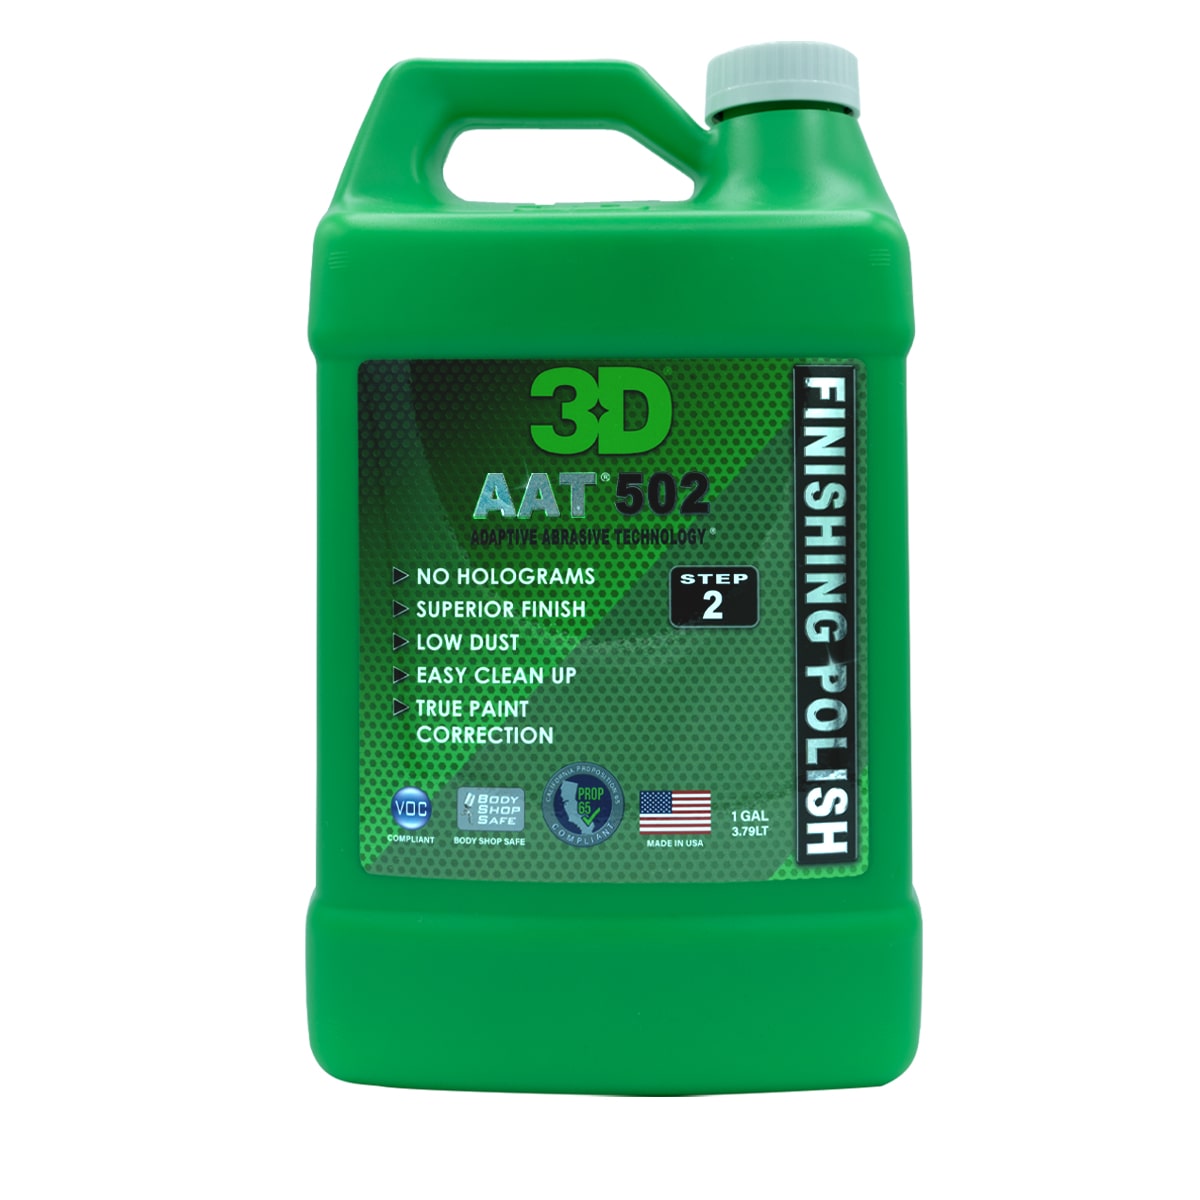 3d aat 502 body shop finishing compound